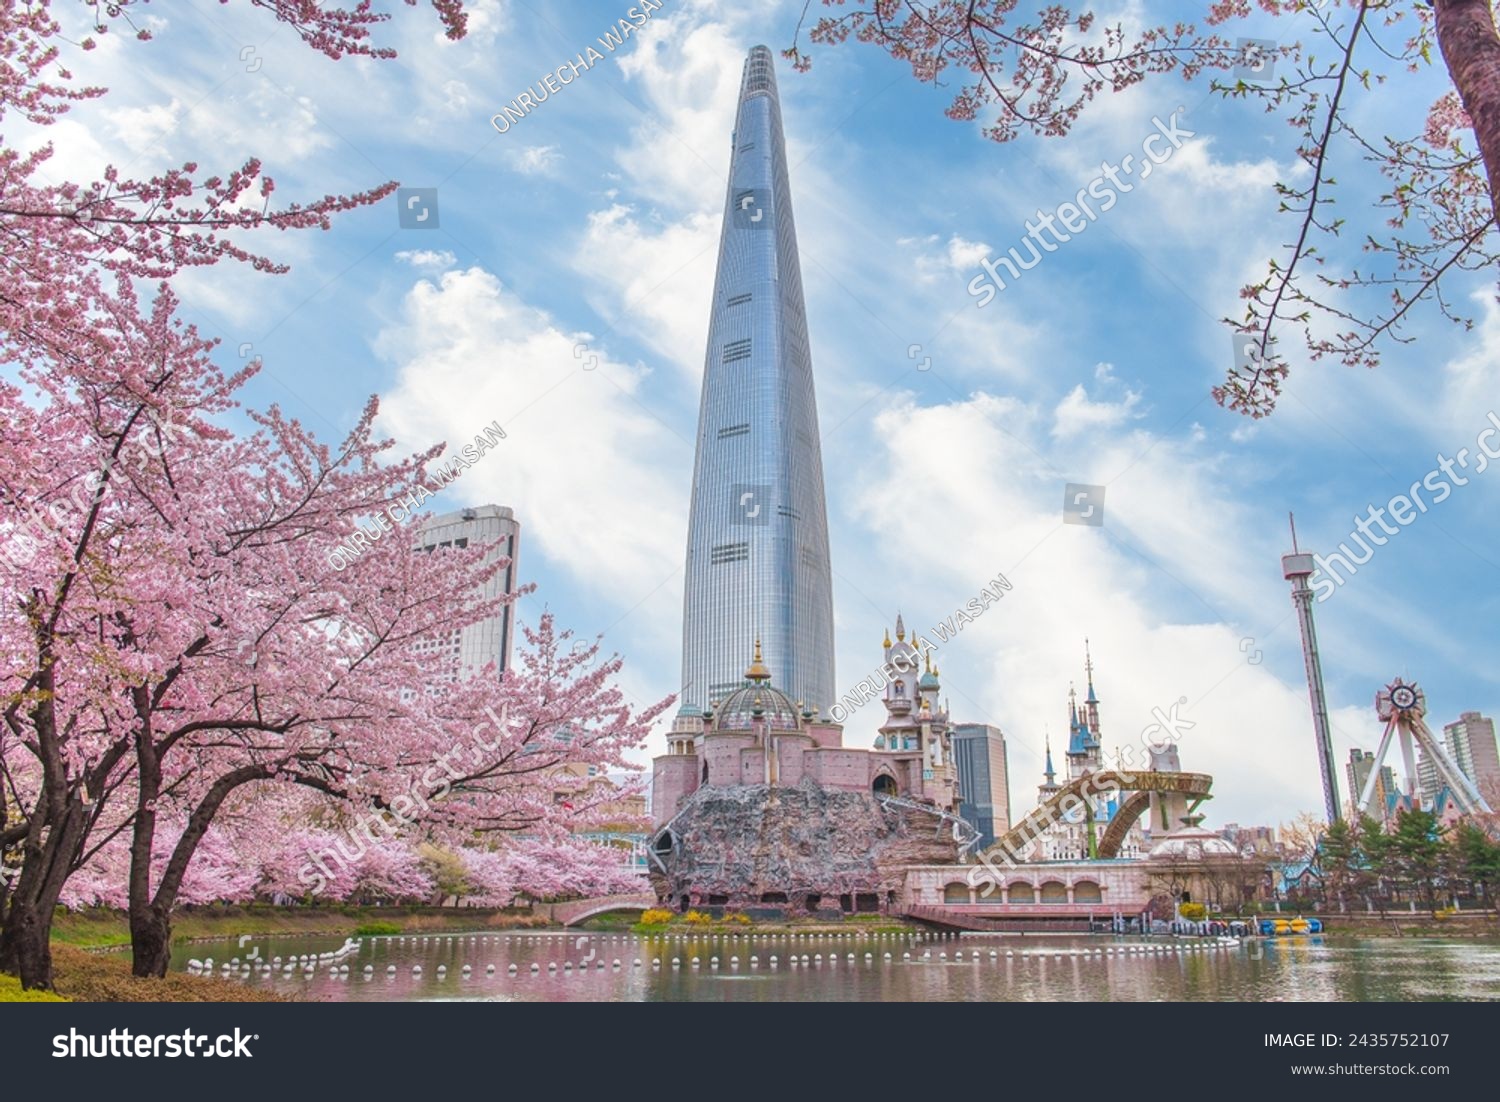 Lotte World Amusement Park and Seokchon Lake  in Spring Cherry blossoms bloom in late March-April.  Seoul, South Korea #2435752107